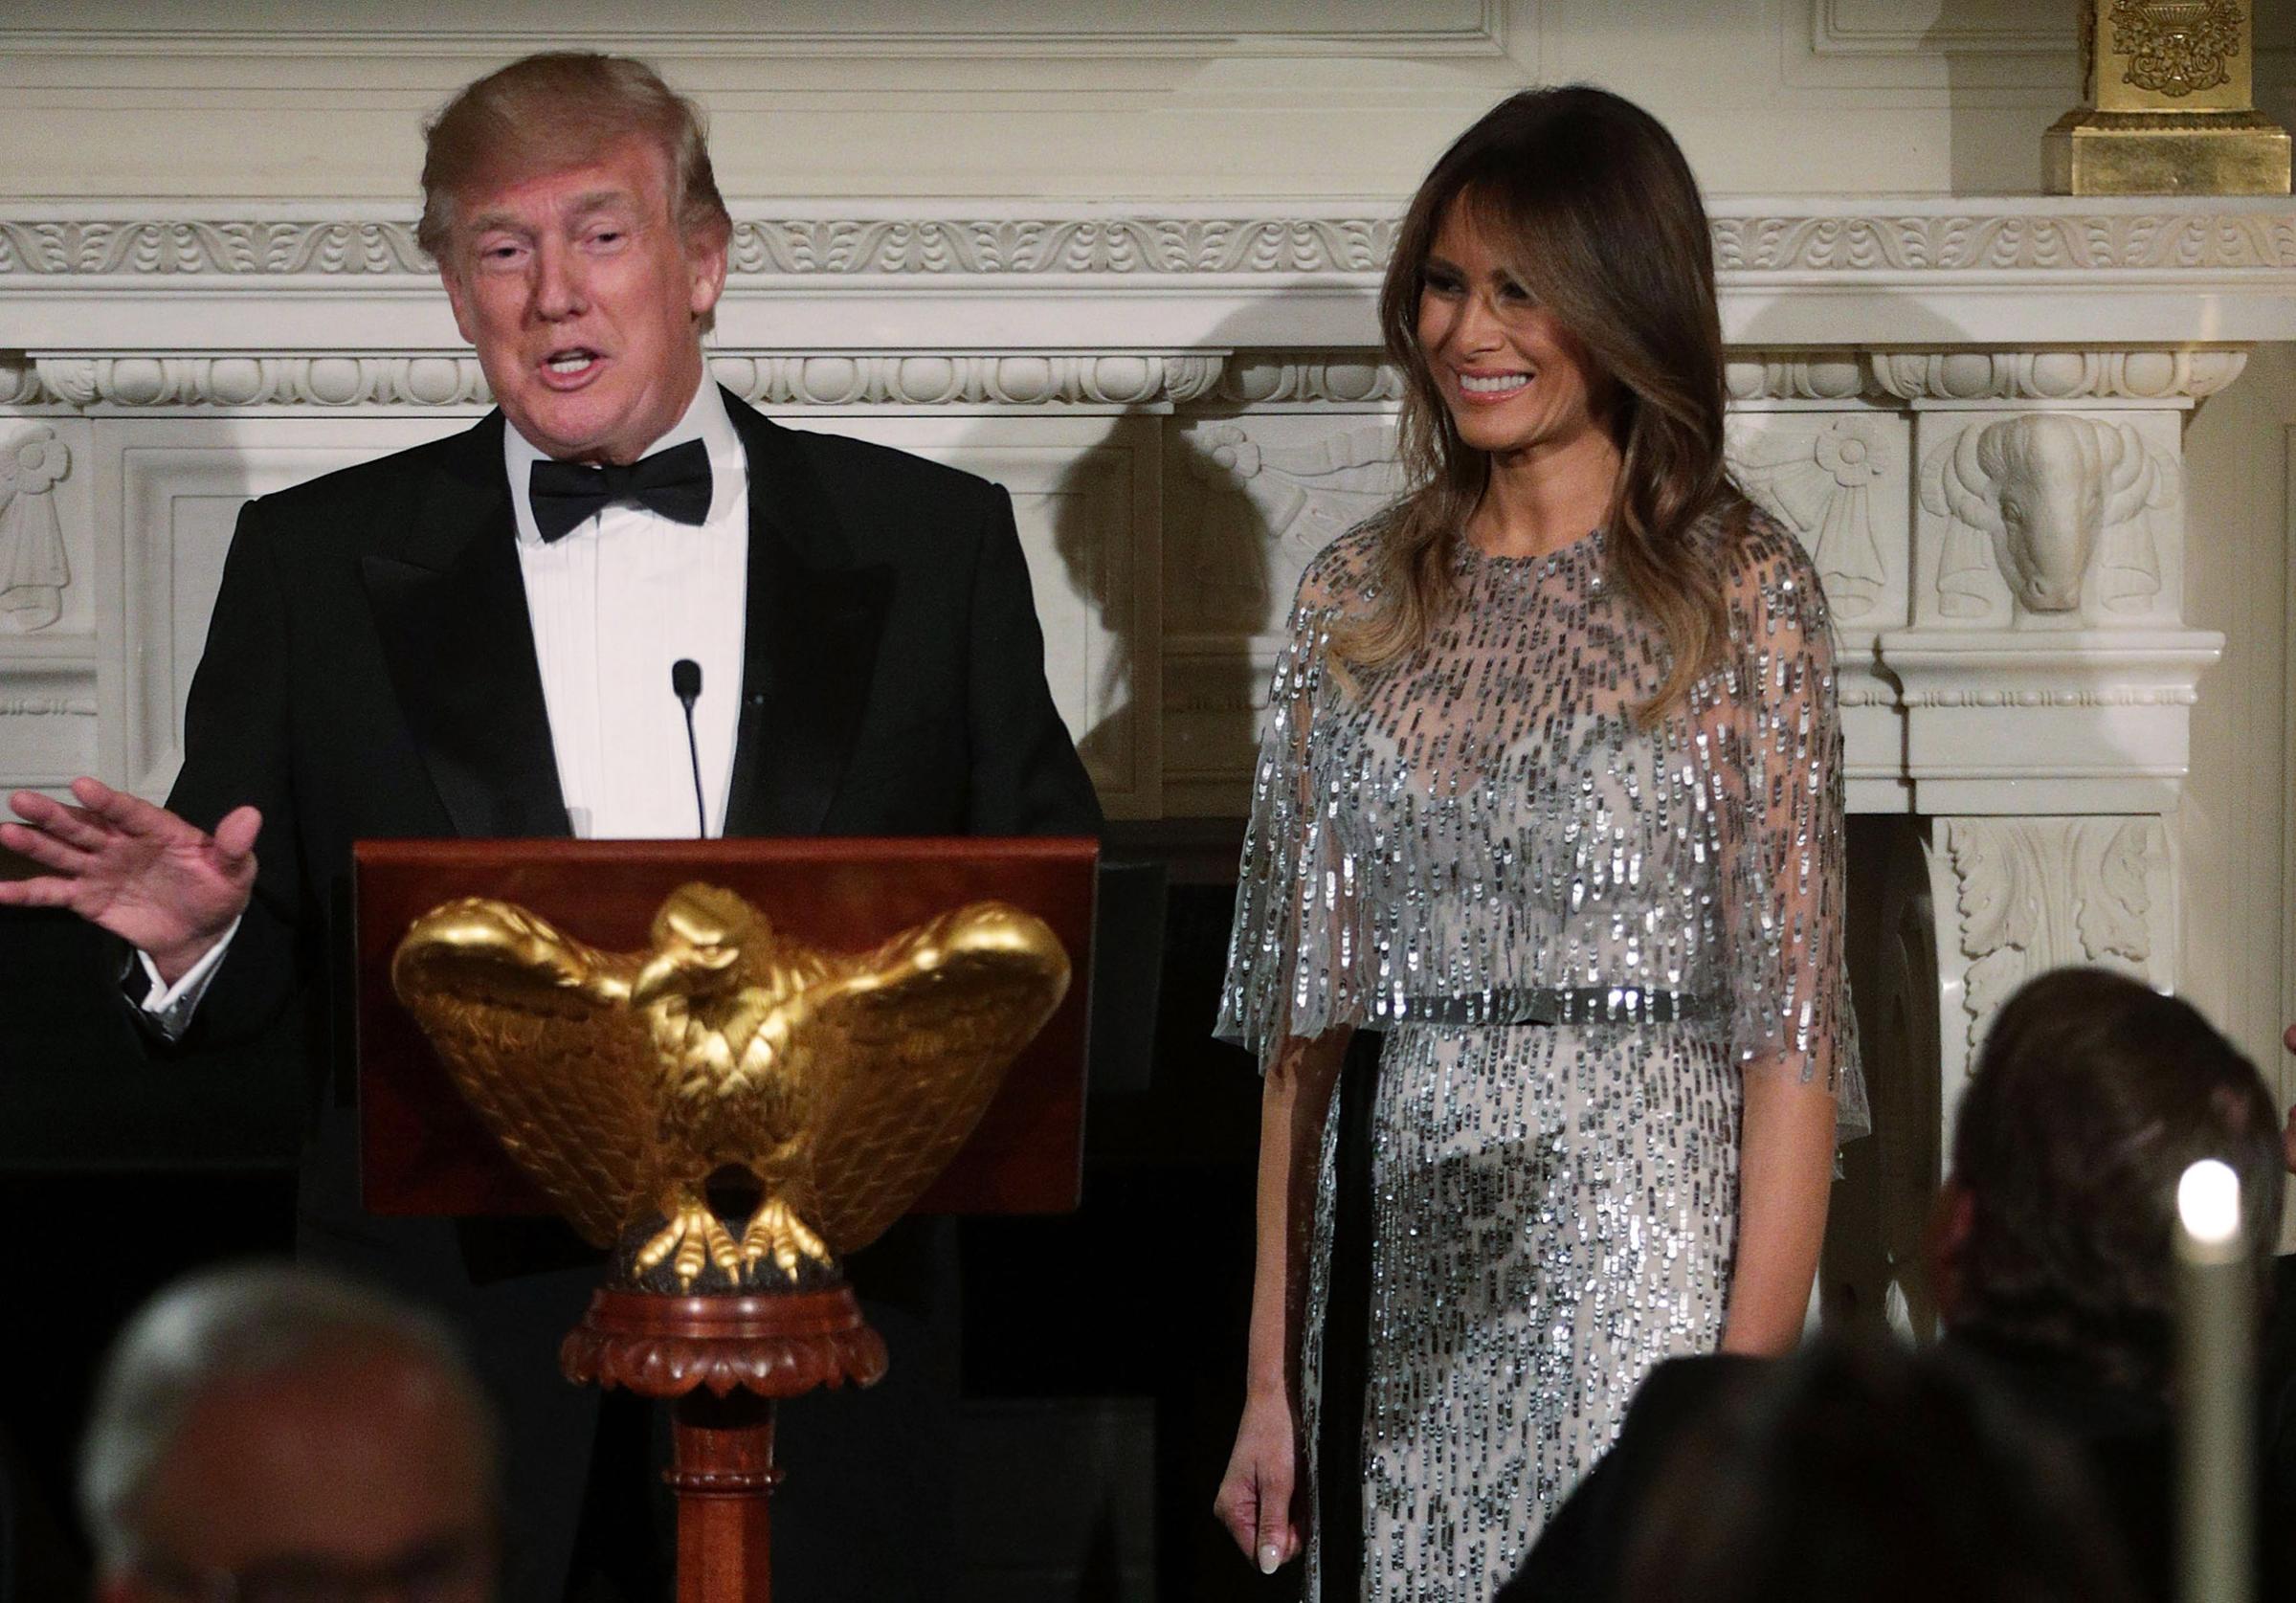 President Donald Trump speaks with first lady Melania Trump at his side, wearing a Monique Lhuillier silver dress stands, during a reception at the State Dining Room of the White House Sept.14, 2017, in Washington, DC. President Donald Trump speaks as first lady Melania Trump wearing a Monique Lhuillier silver dress listens during a reception at the State Dining Room of the White House Sept.14, 2017, in Washington, DC.